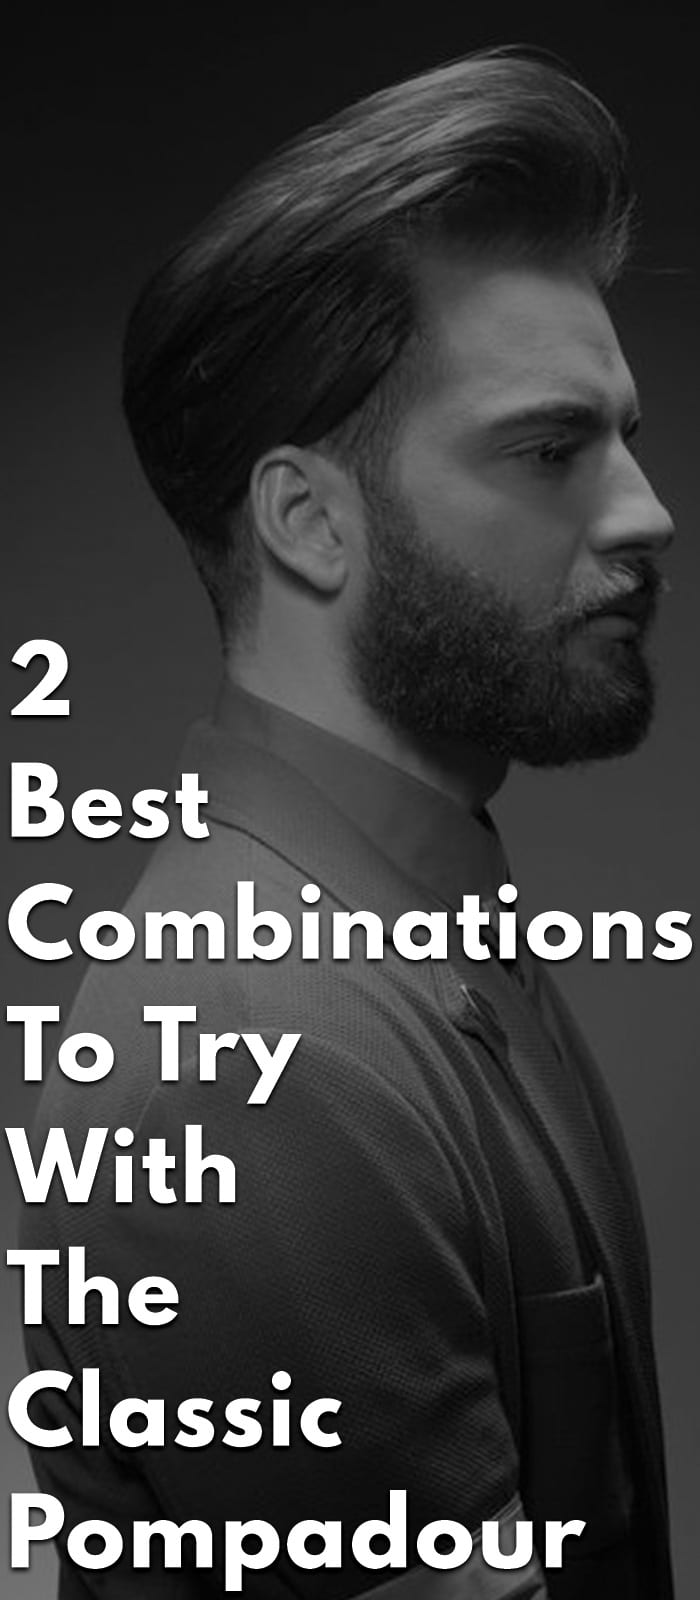 2 Best Combinations To Try With The Classic Pompadour